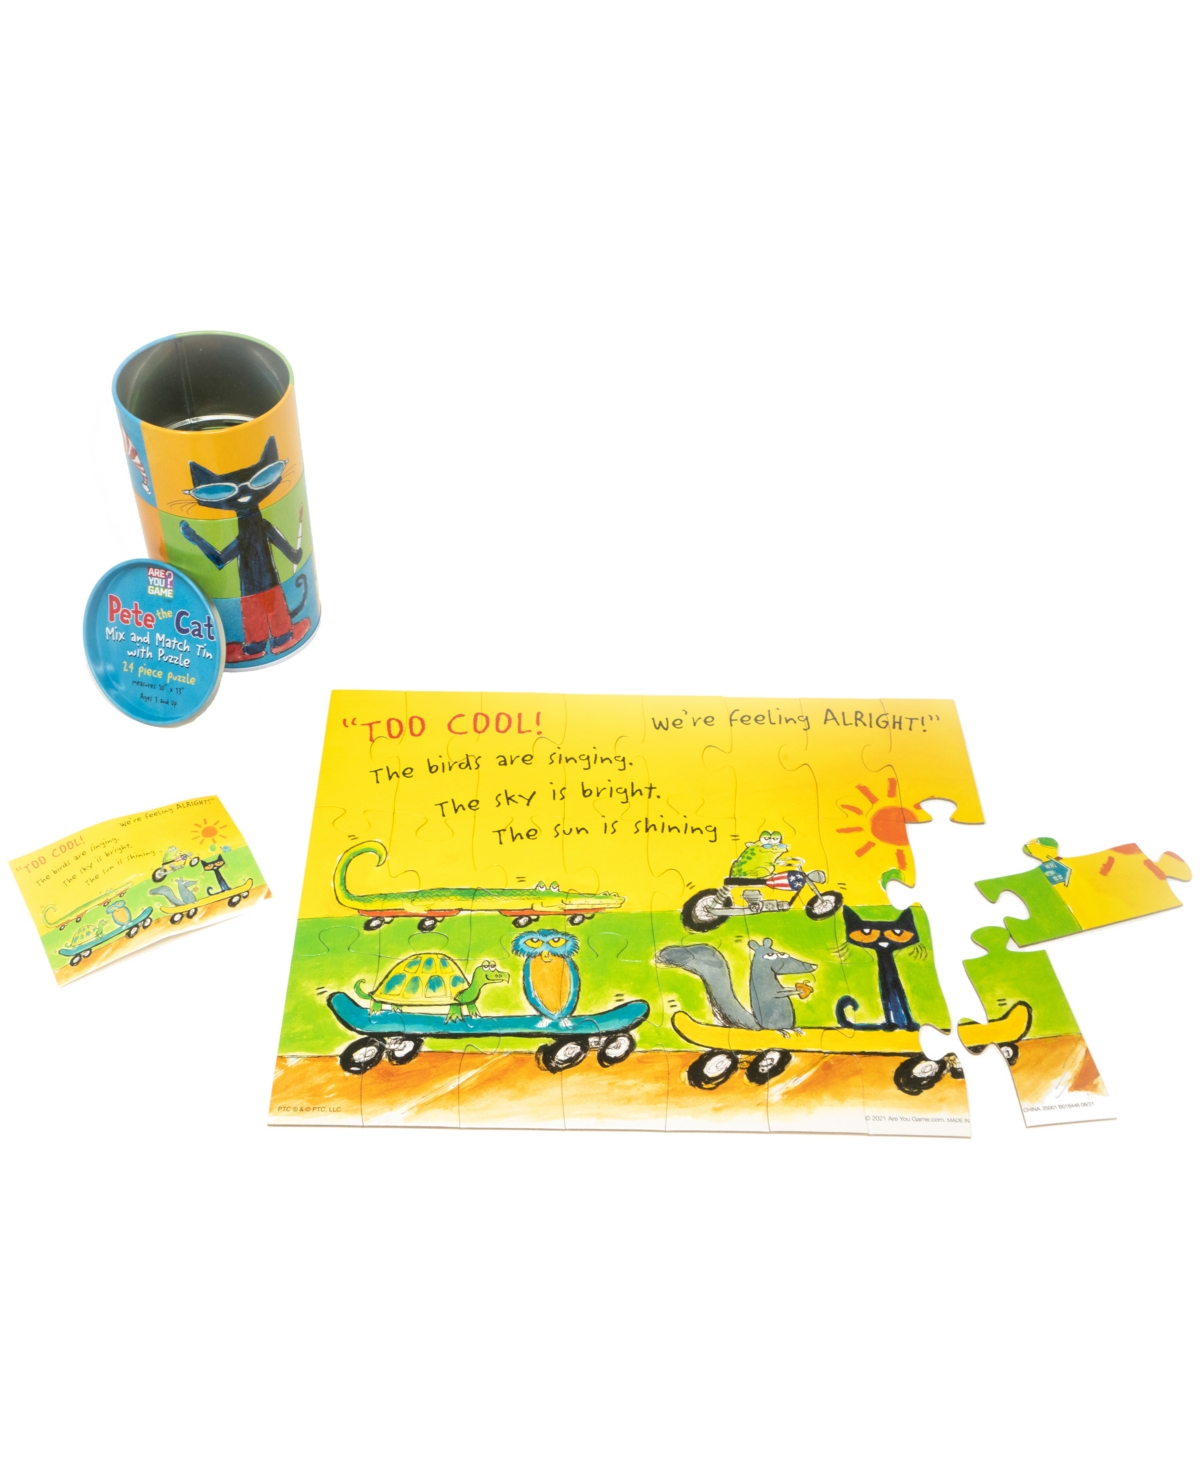 Shop Areyougame .com Pete The Cat Mix And Match Tin With Puzzle Set, 25 Pieces In Multi Color